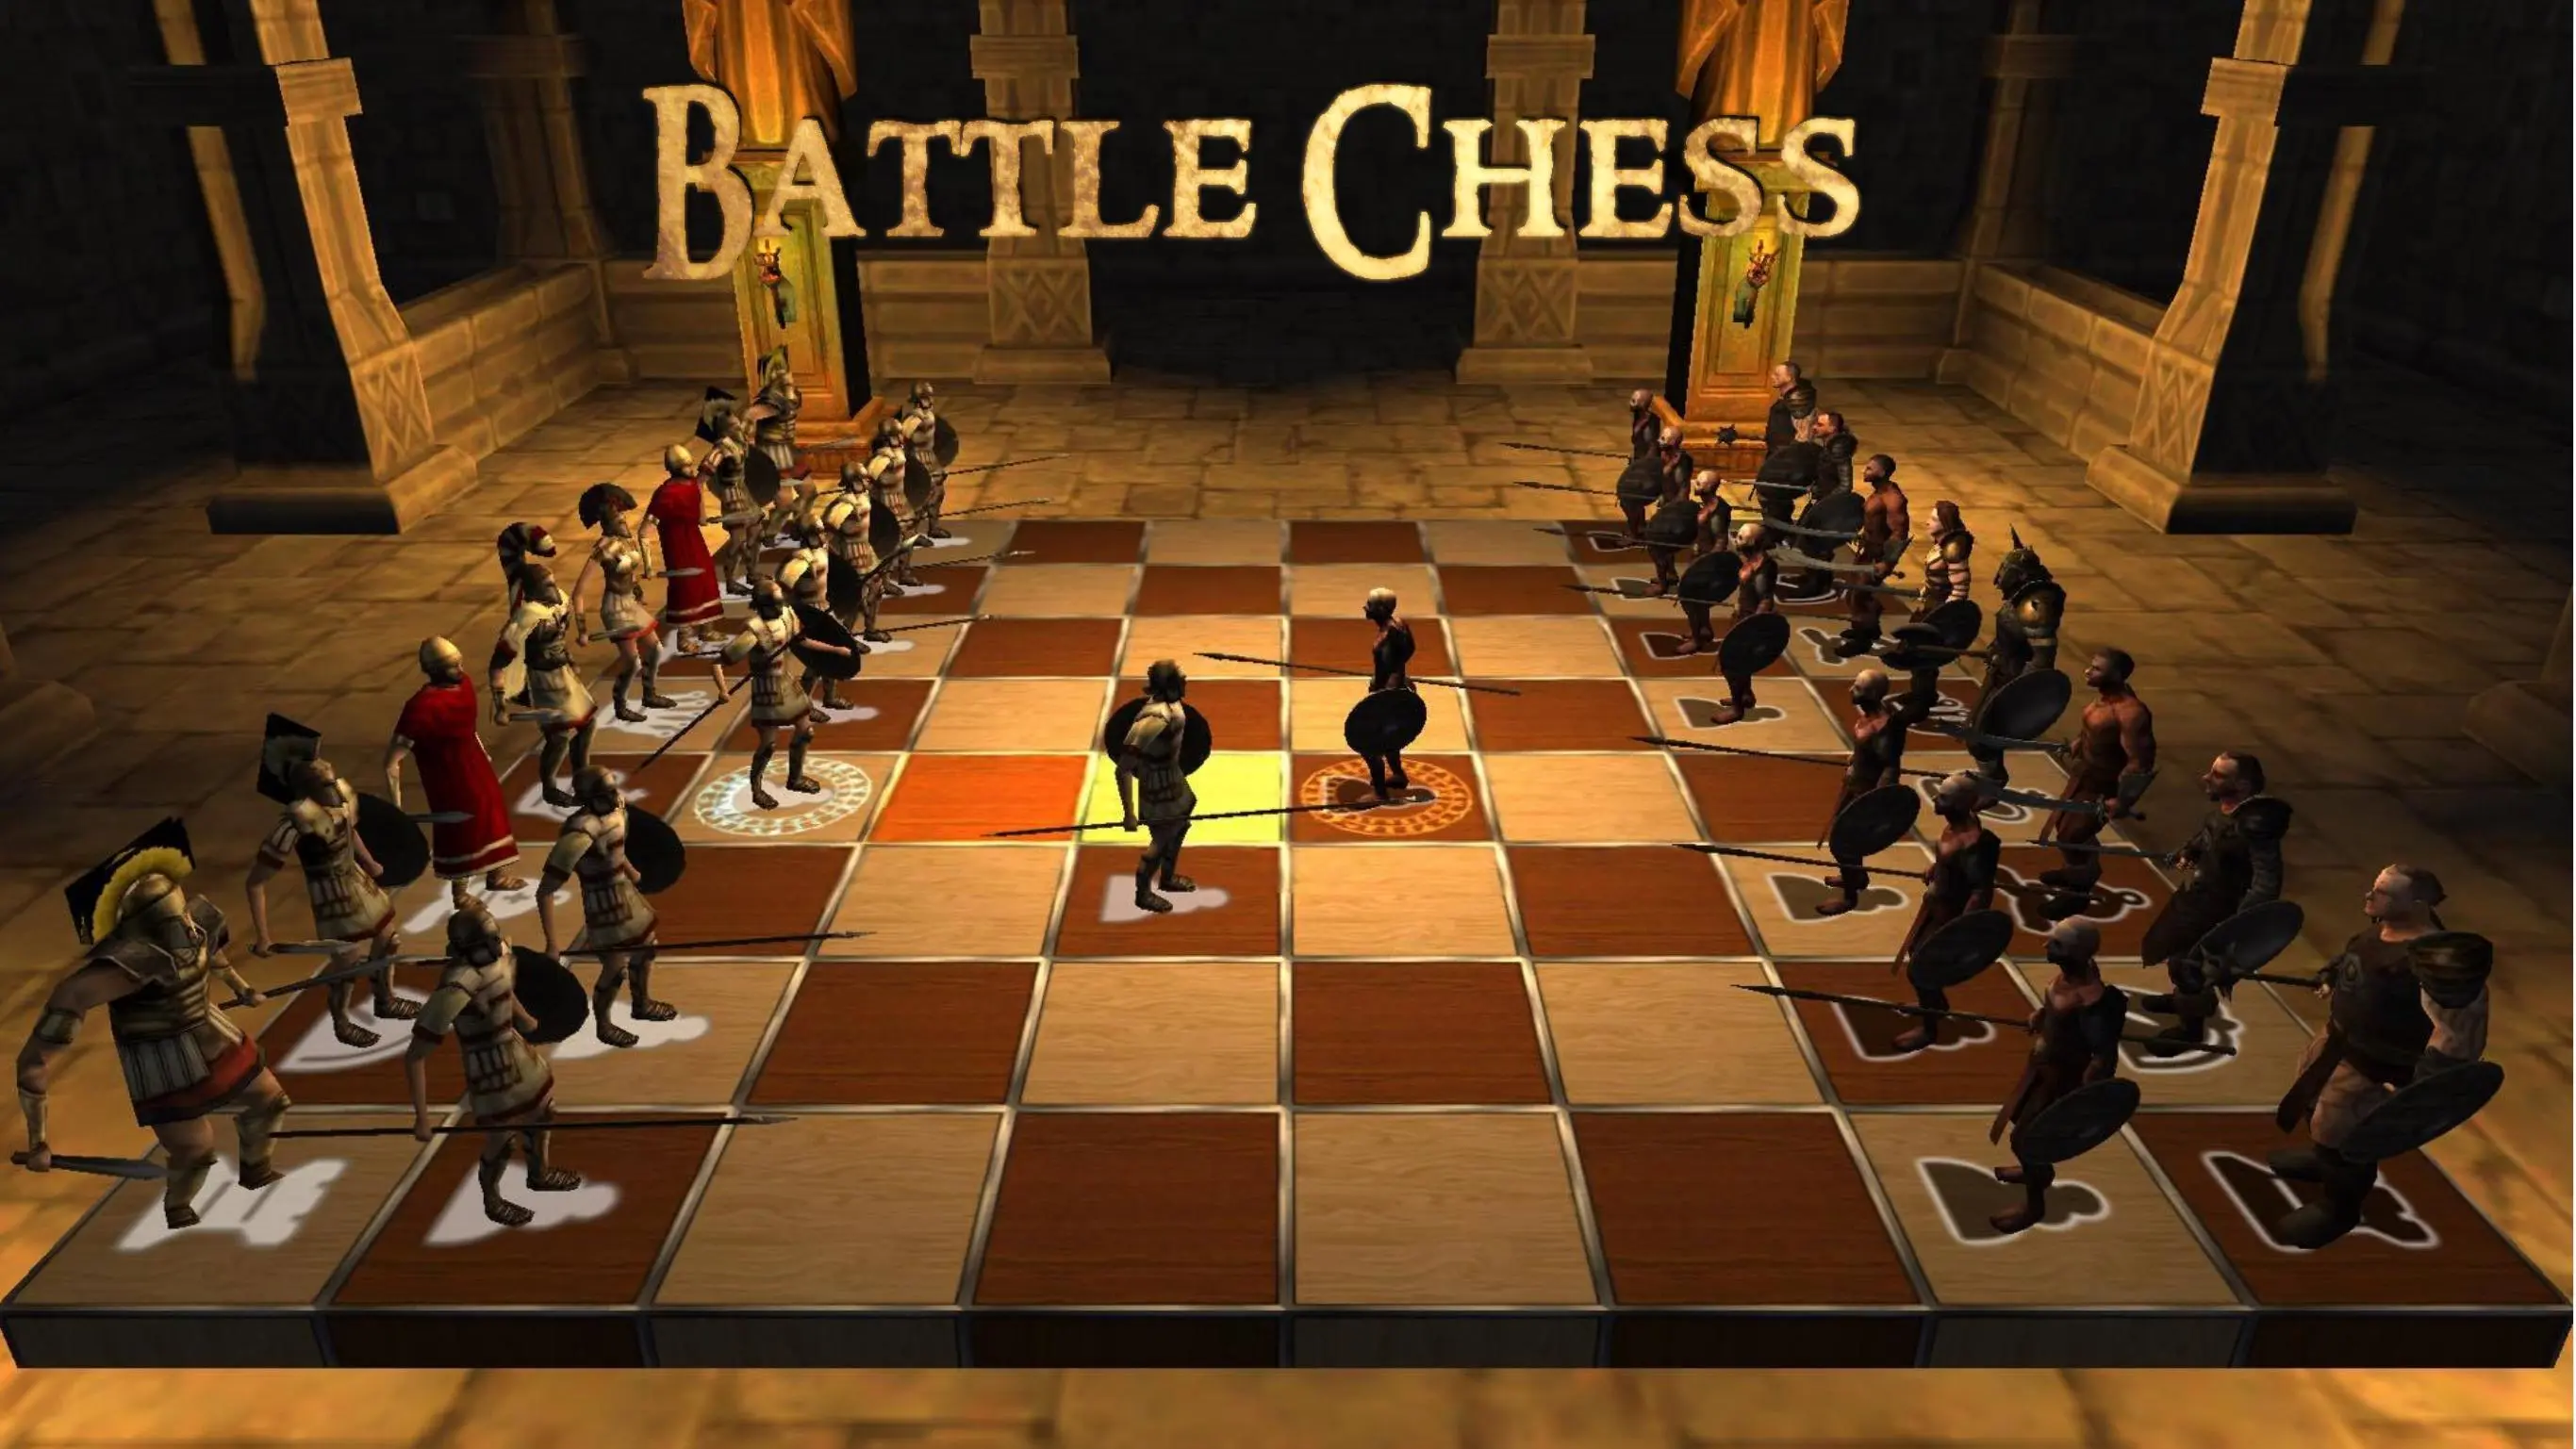 3d chess pc game download download itunes for windows 10 latest version